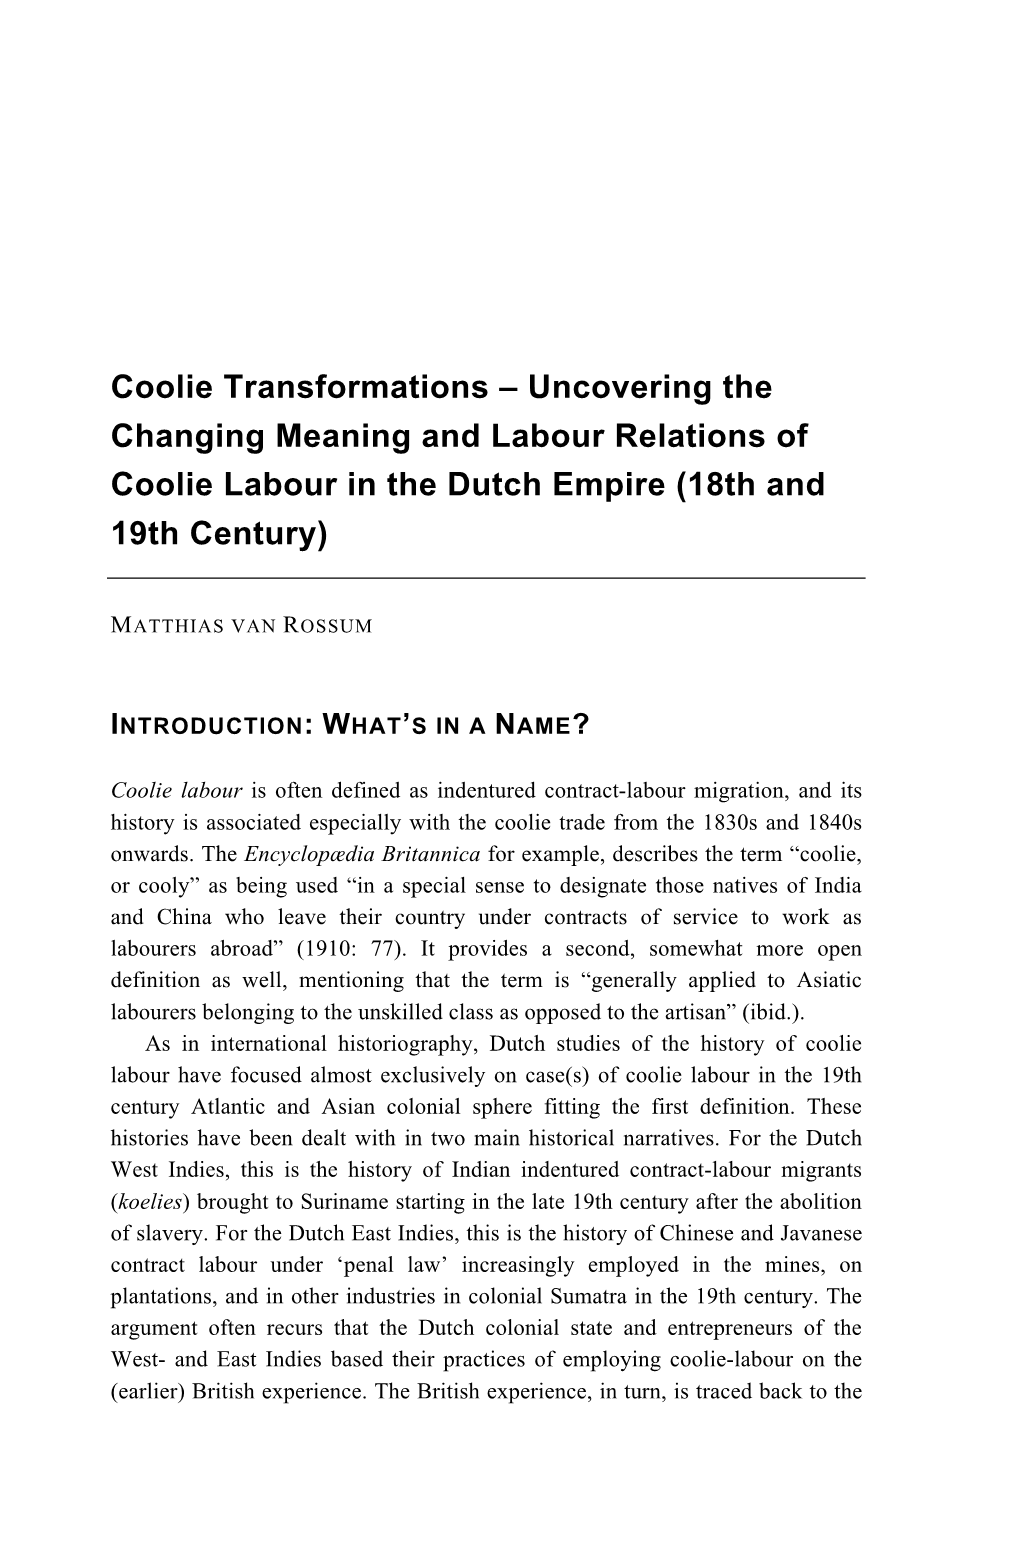 Coolie Transformations – Uncovering the Changing Meaning and Labour Relations of Coolie Labour in the Dutch Empire (18Th and 19Th Century)